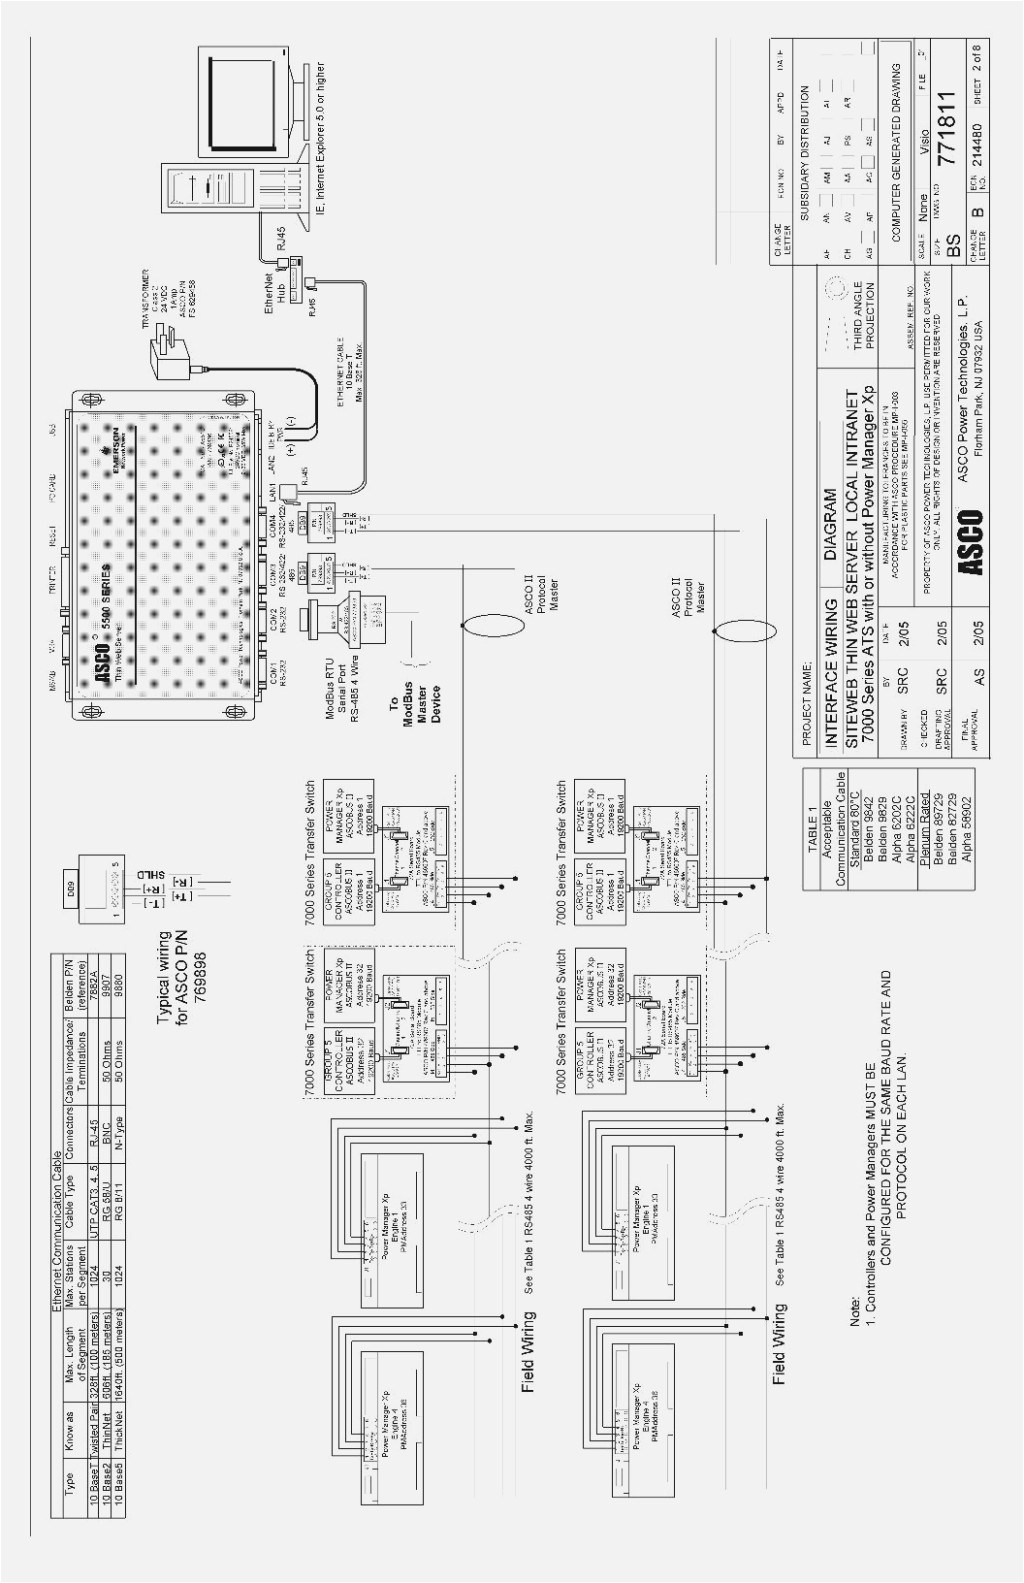 asco red hat wiring diagram 3 auto electrical wiring diagram mix asco 7000 transfer switch wiring